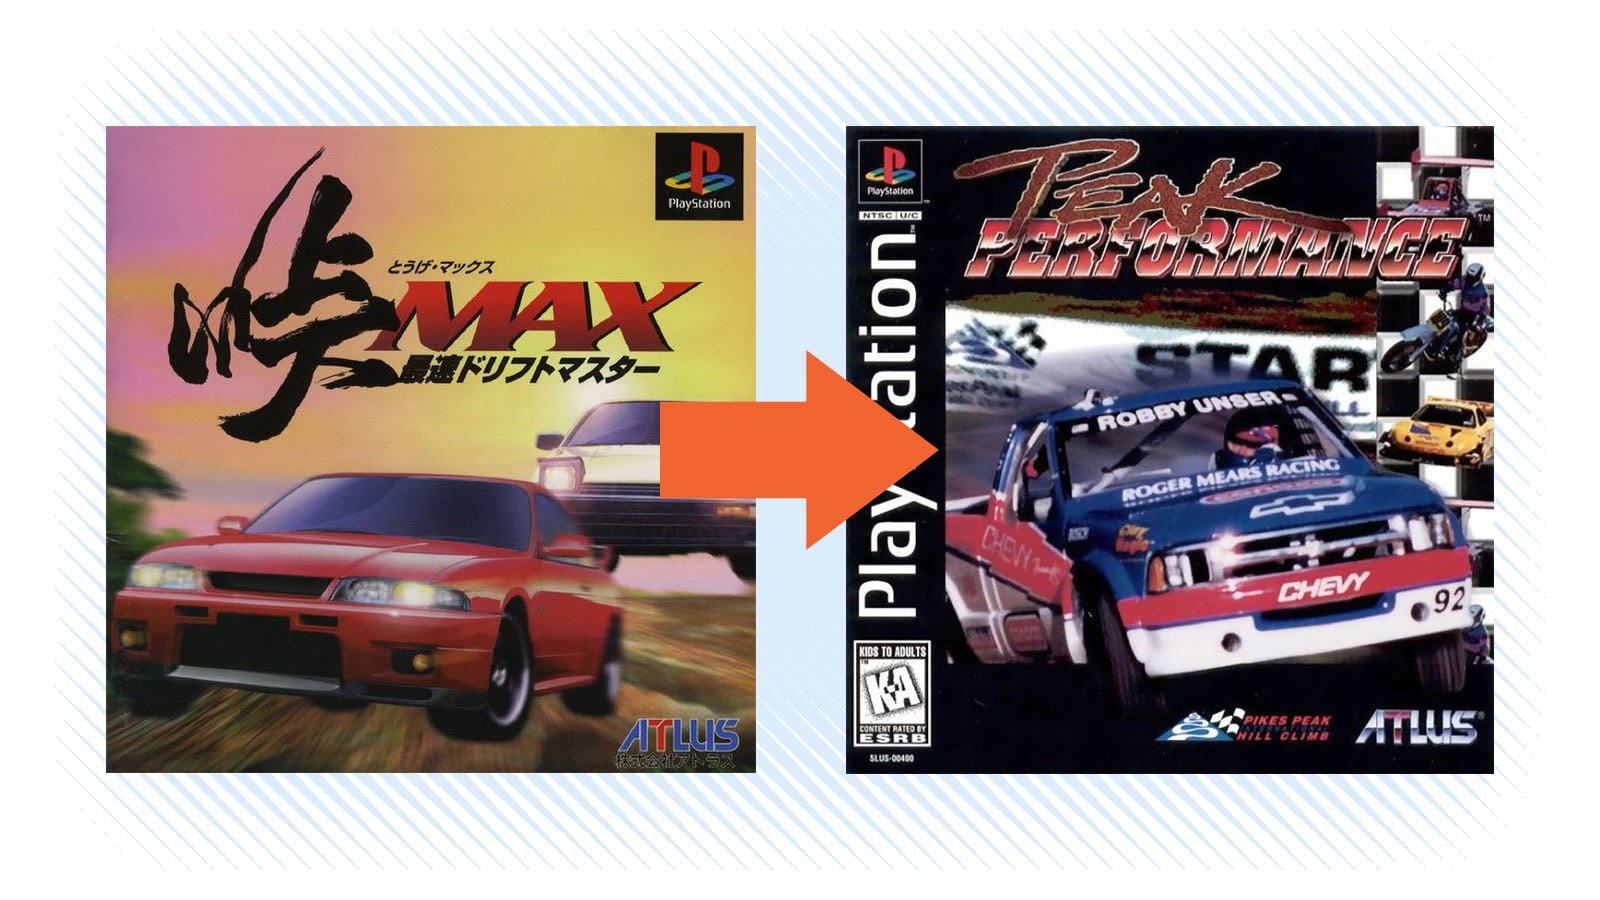 The Most Shameless False Advertising You’ll Ever See Was The Art On ’90s Racing Game Boxes